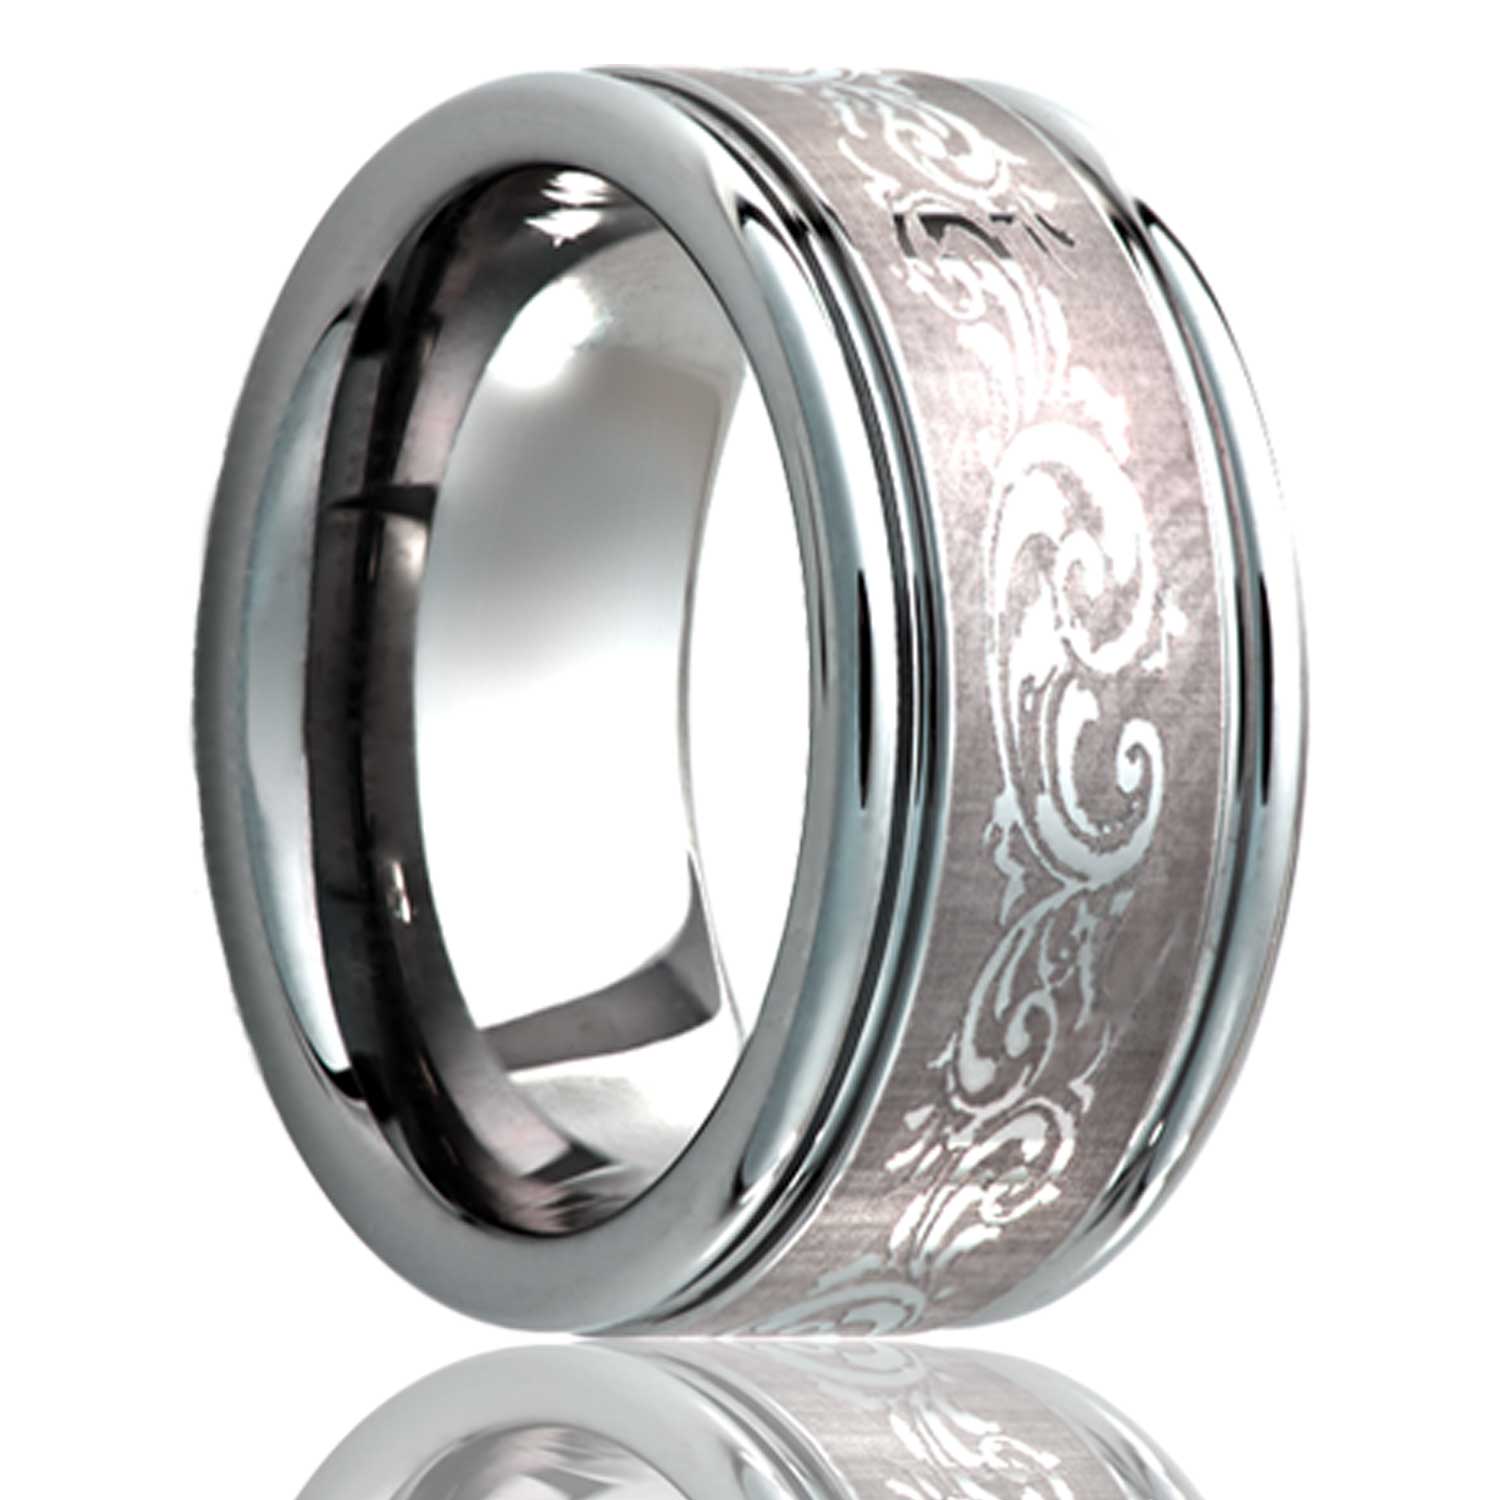 A swirl pattern grooved titanium wedding band displayed on a neutral white background.